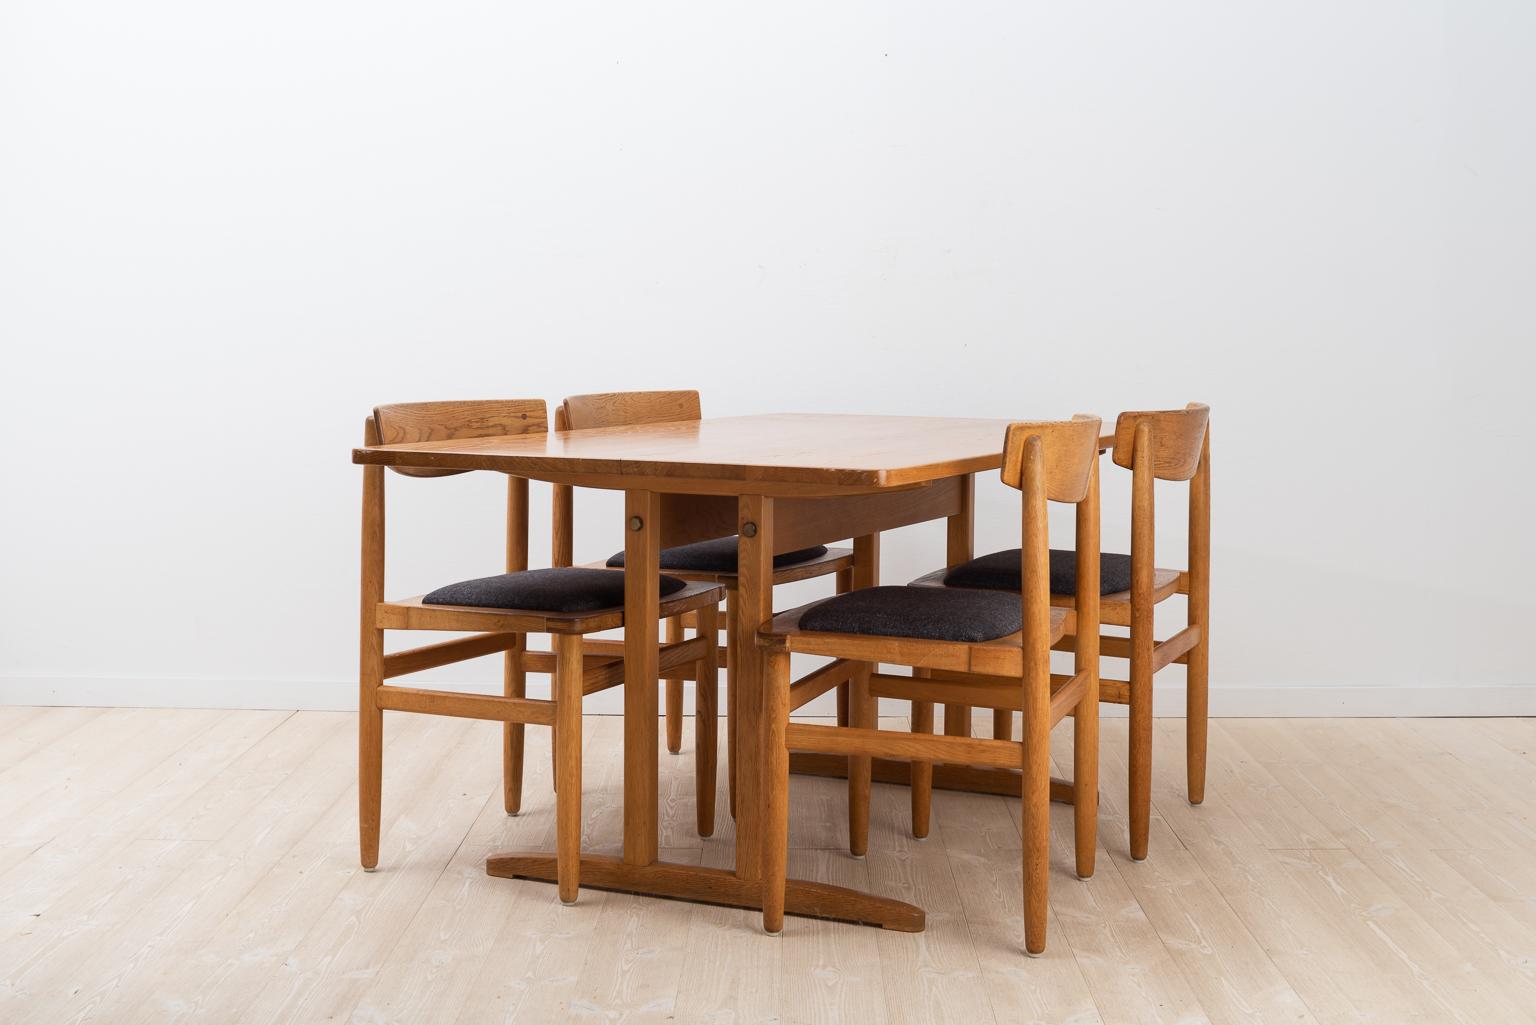 Swedish dining group with a table and four chairs. Designed by Börje Mogensen during the 1950s. Manufactured from oak and produced by Karl Andersson & Söner. The dining group is in the so called Shaker style. The pieces are marked with an